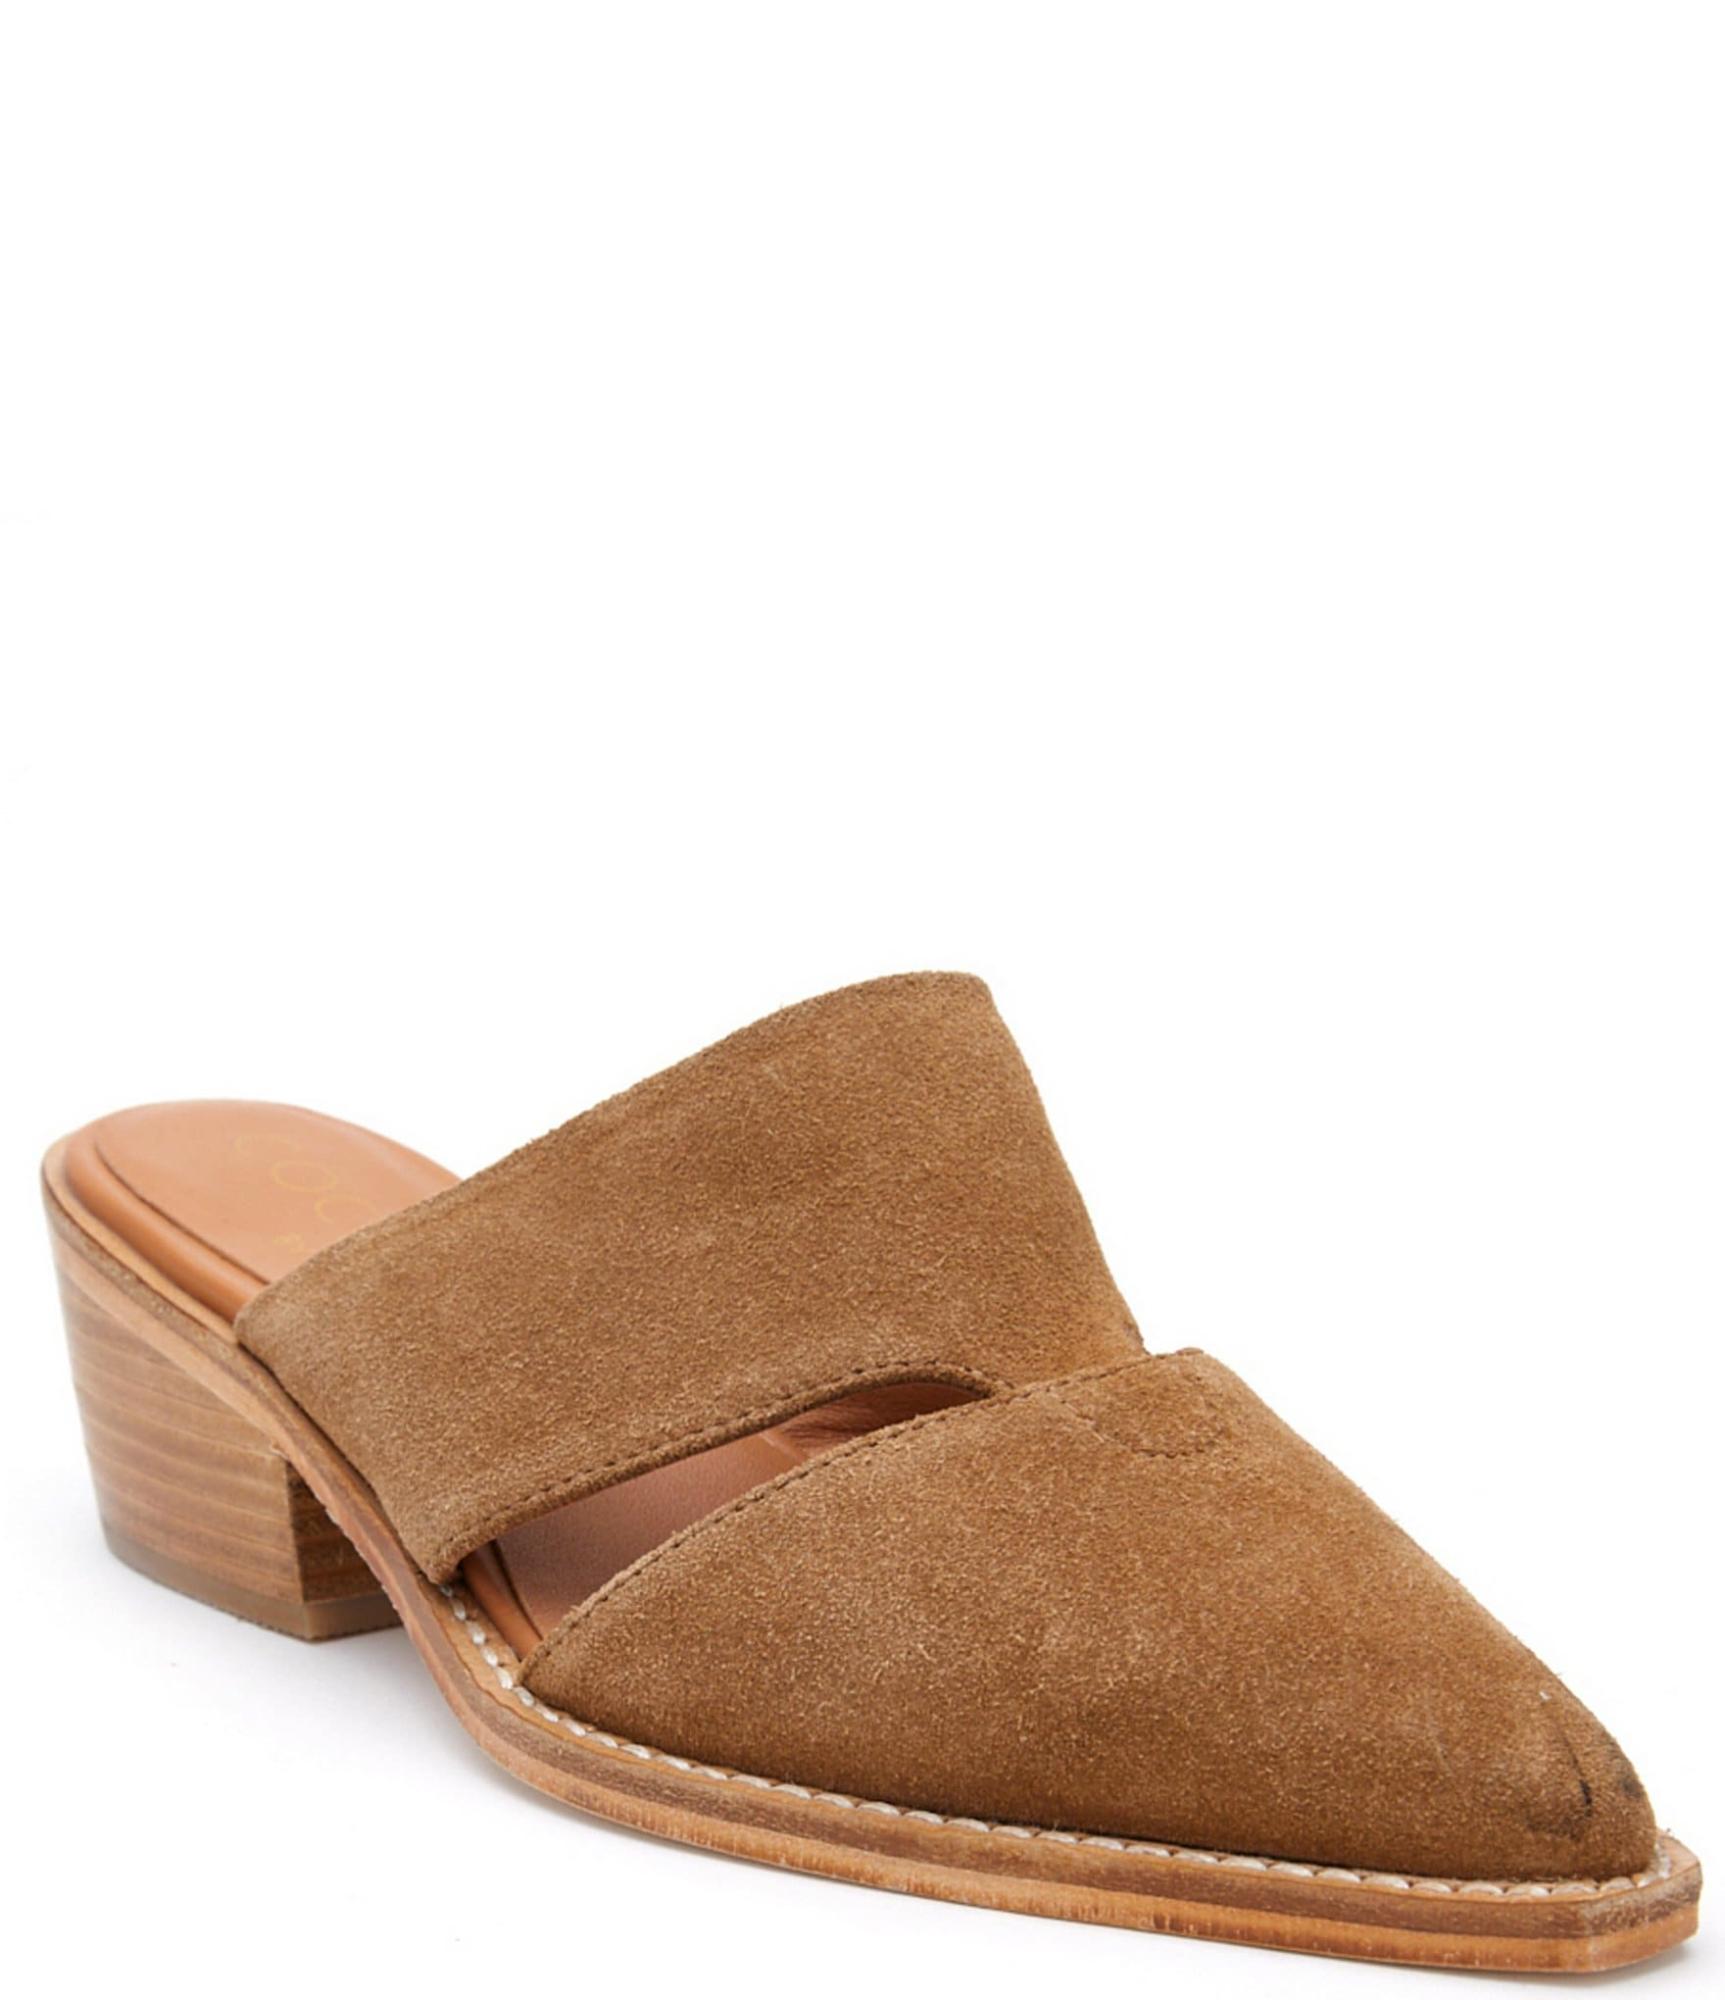 Beckett Suede Cut Out Mules